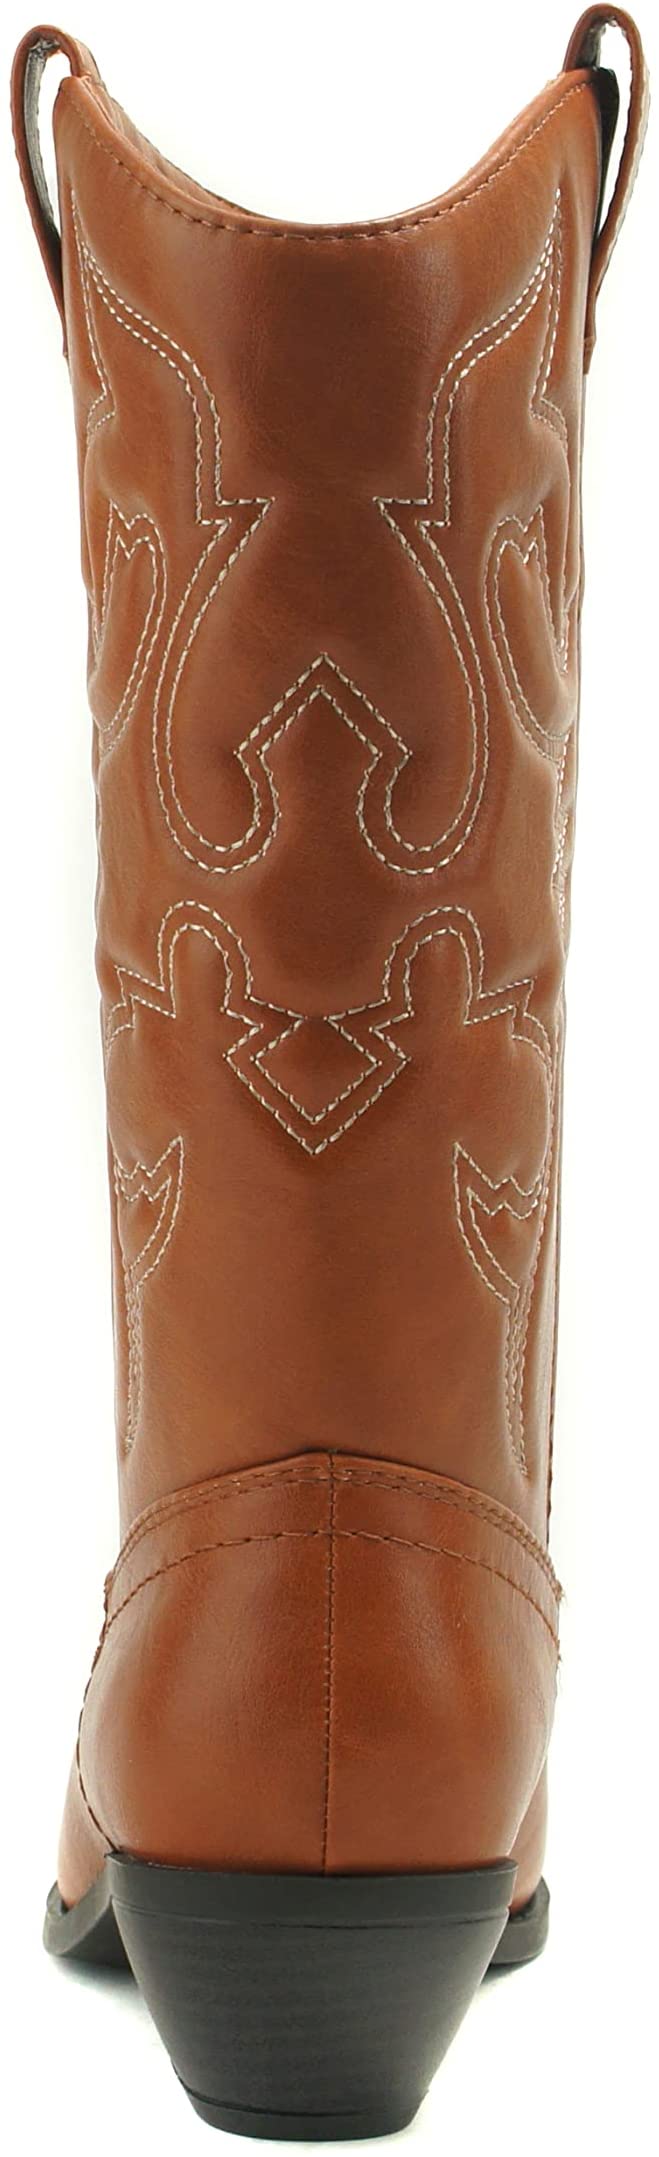 Soda Women Cowgirl Cowboy Western Stitched Boots Pointy Toe Knee High Reno-S Cognac Tan Light Brown 7.5 - image 4 of 4